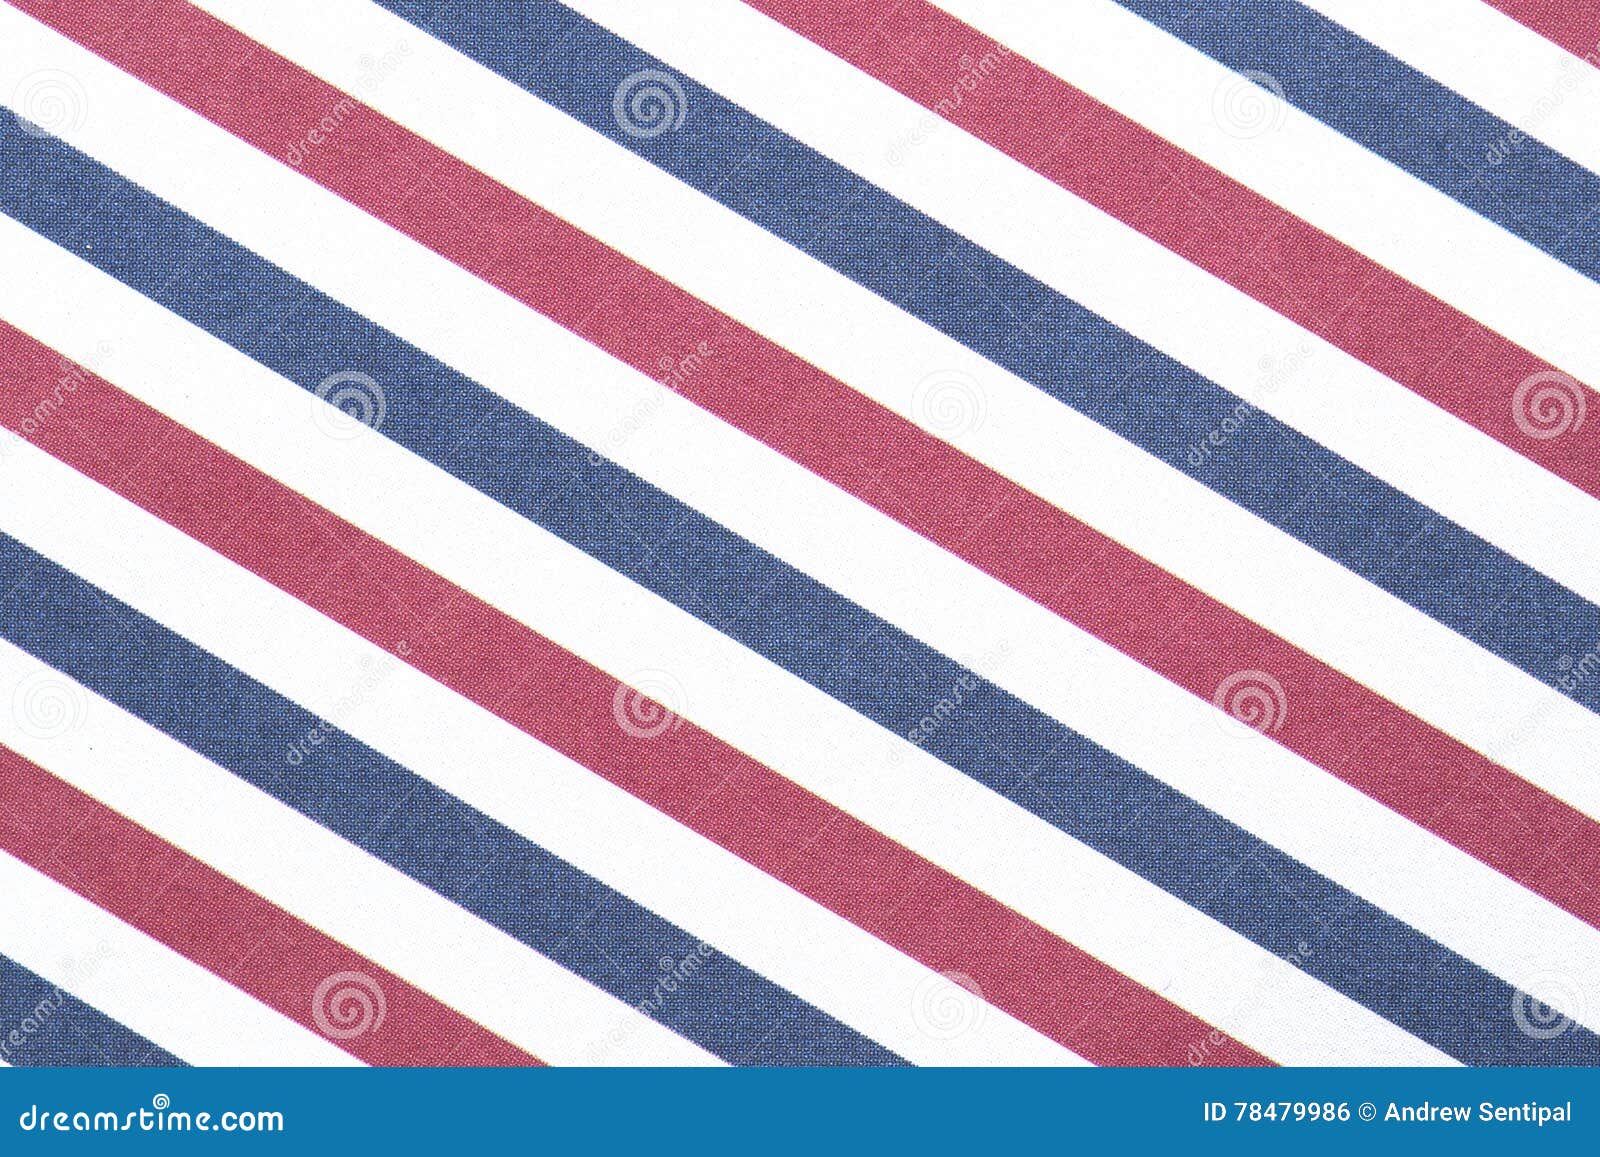 Red White And Blue Stripes For Background Stock Photo